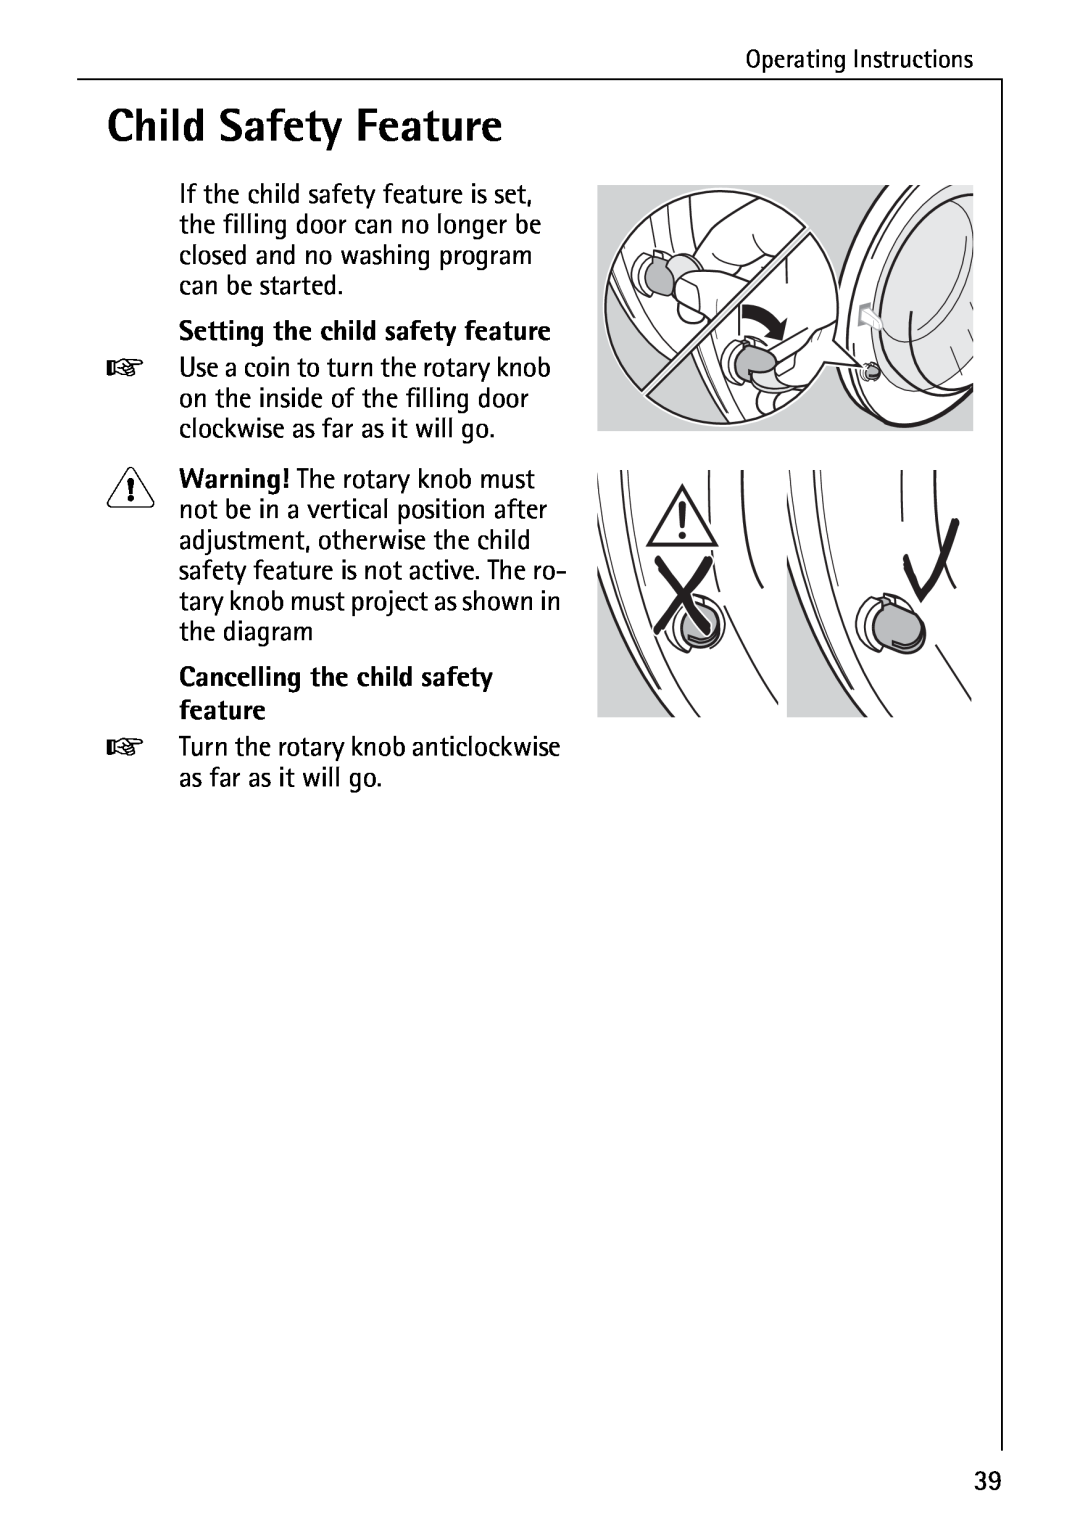 AEG 72640 manual Child Safety Feature, Cancelling the child safety feature 